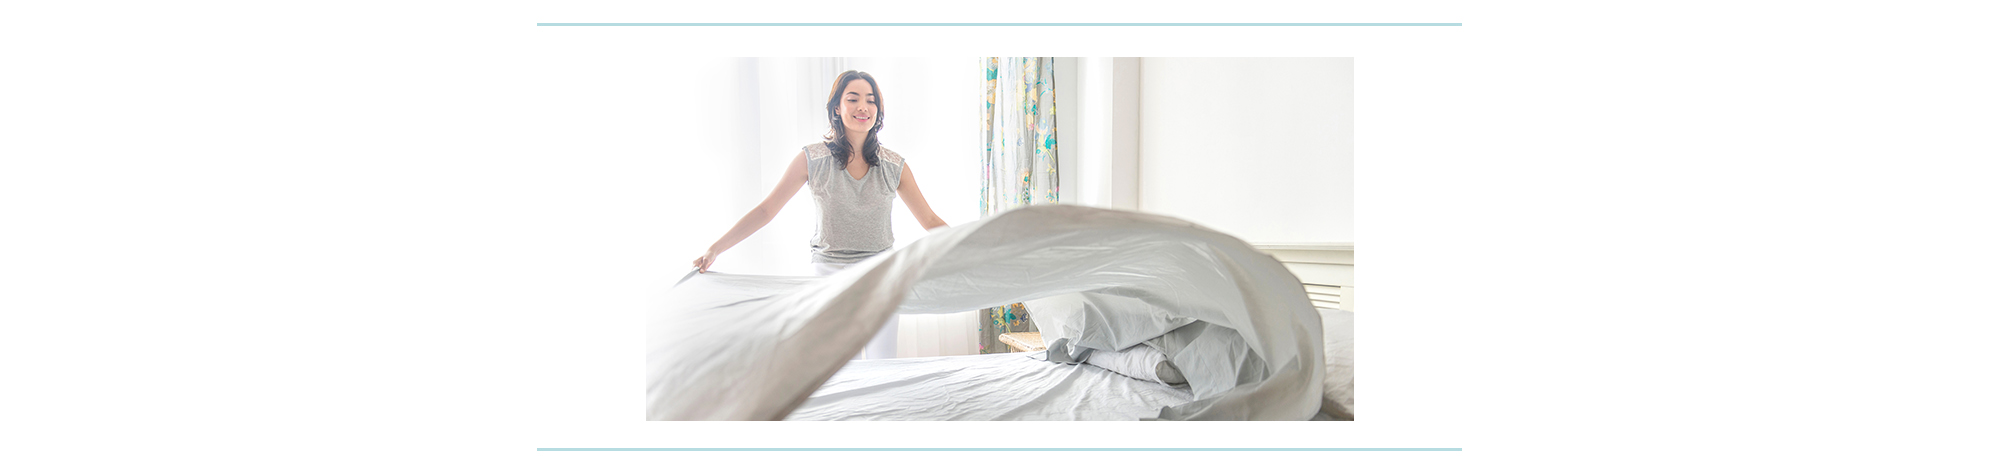 A woman puts a clean sheet on a bed.